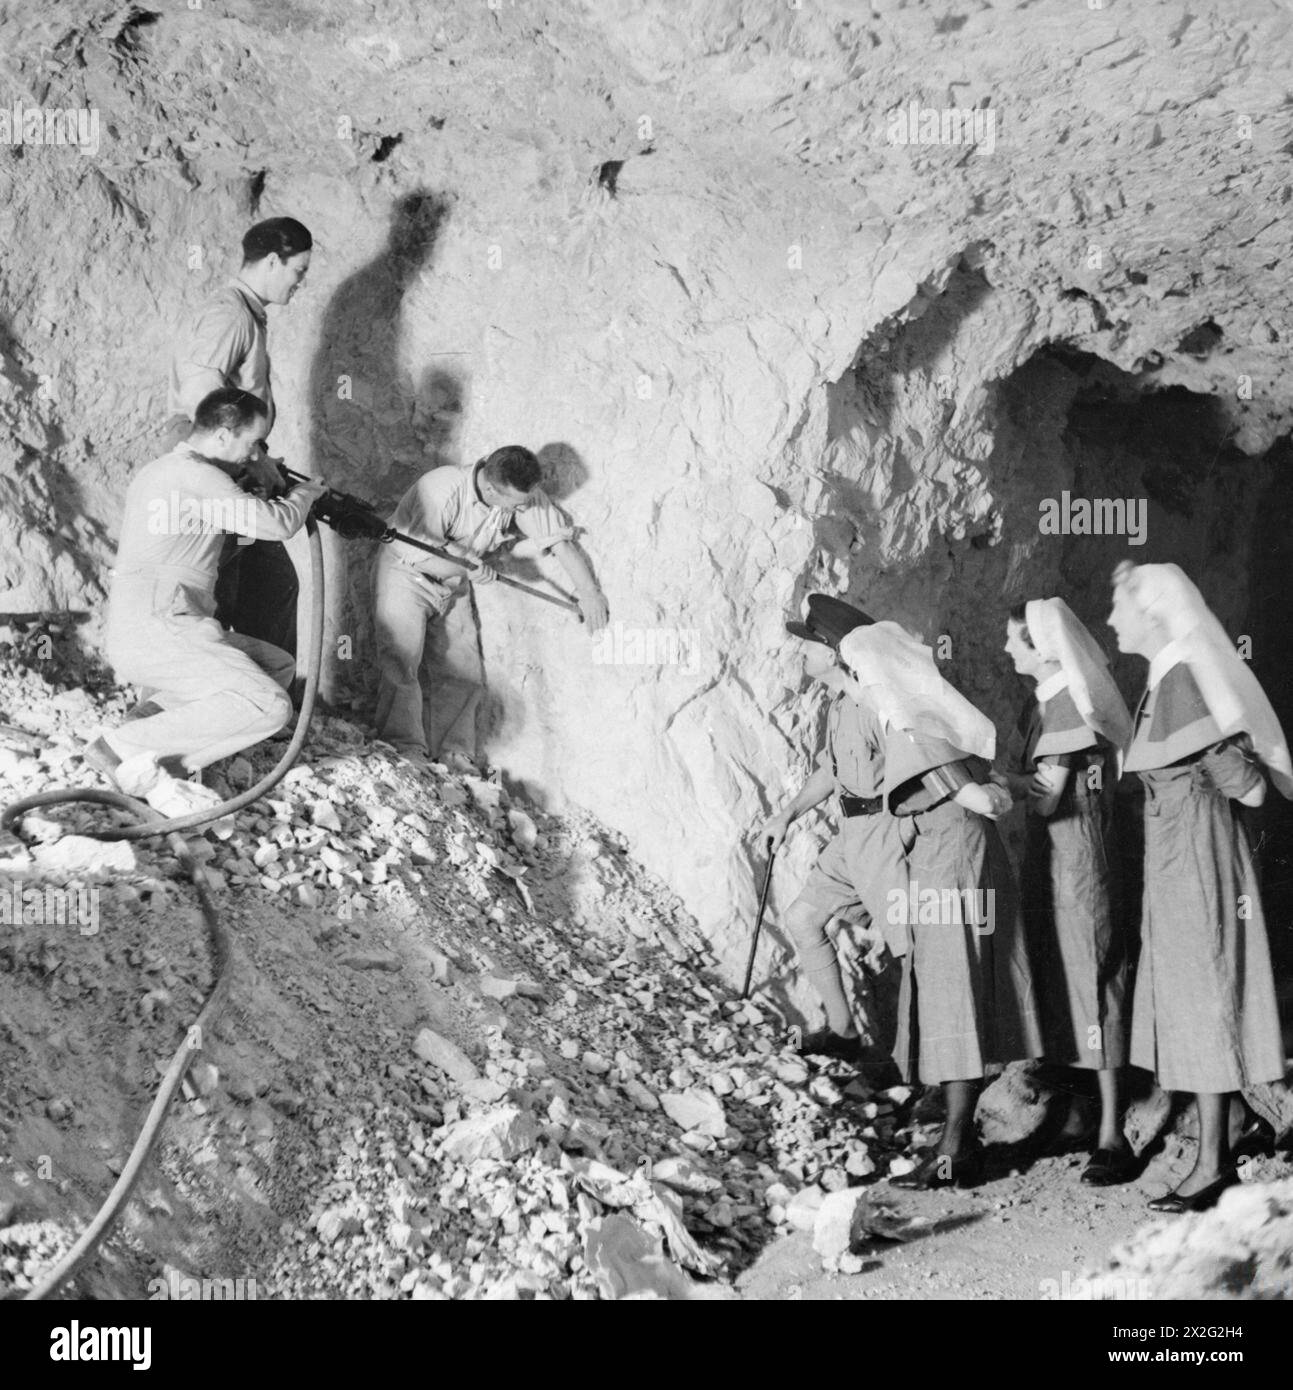 IN A GIBRALTER UNDERGROUND HOSPITAL - When most of the civilian population of Gibralter was evacuated, a hospital was established in one of the air raid shelters cut into the solid rock. It is constantly being added to and is ready for any eventuality. The work of excavation is being done by Civilian engineers, leaving the Royal Engineers to concentrate on defence works. This image shows skilled civilian workmen of the new City Council's staff engaged in construction of a new ward of the hospital. Officer Commanding Hospital and Nursing Staff look on British Army, Royal Engineers Stock Photo